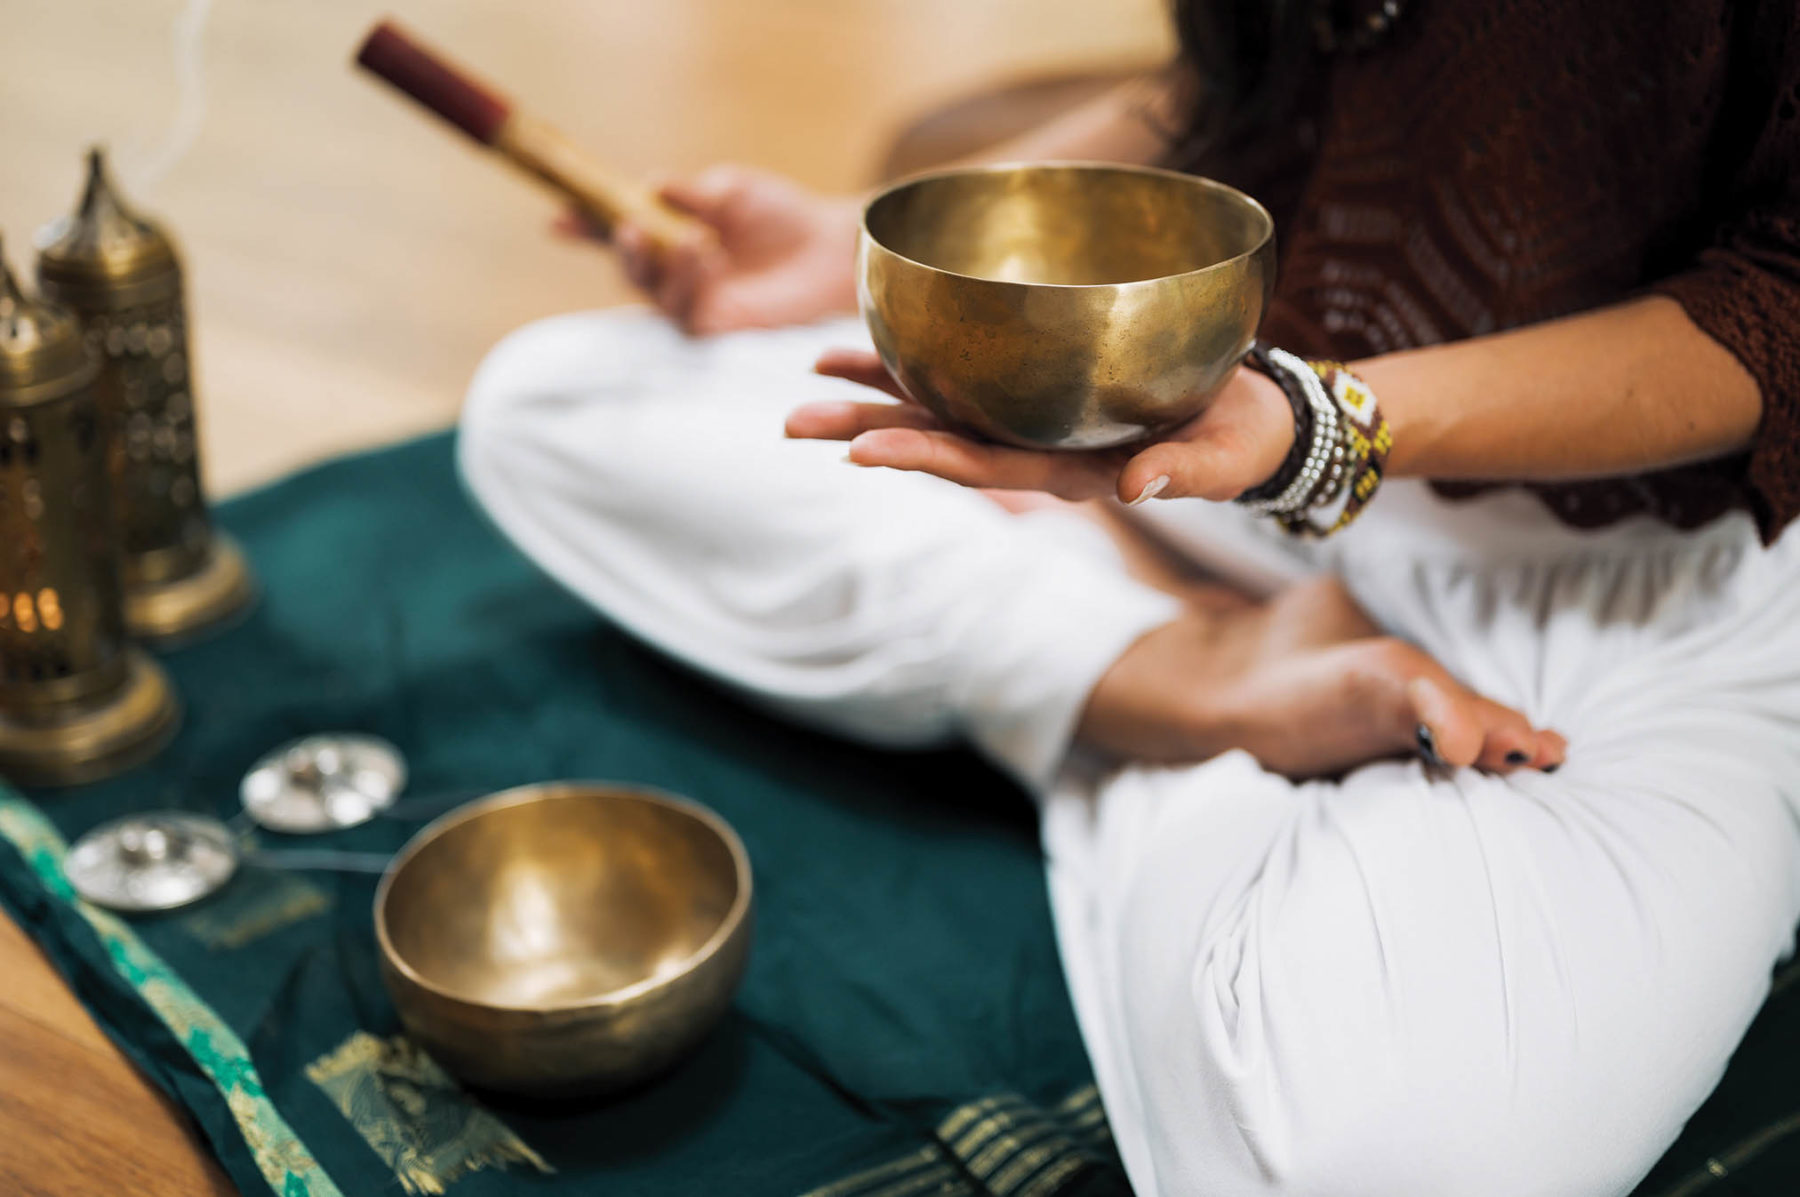 Someone sitting criss-cross and holding one of the sound bath bowls.